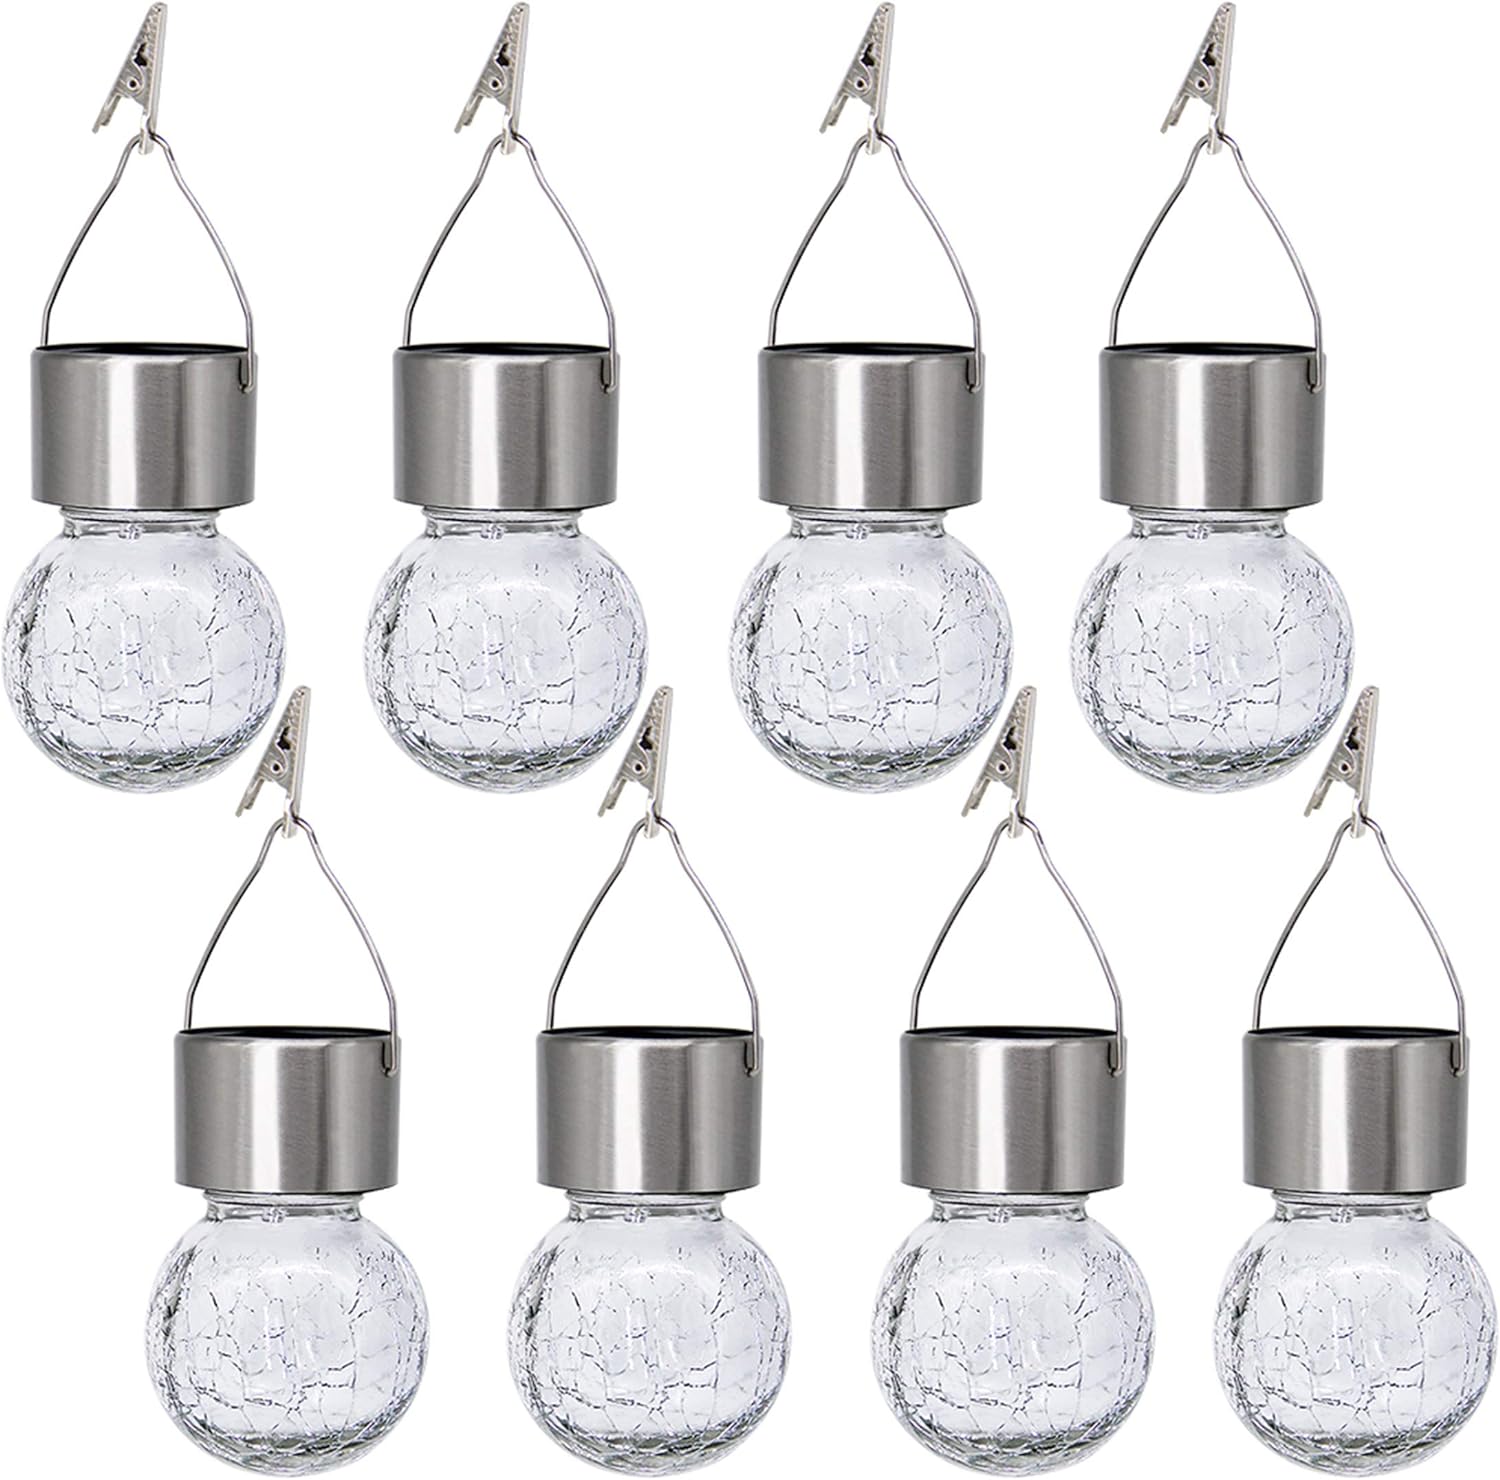 53087 - MAGGIFT 8 Pack Solar Hanging Ball Lights with Umbrella Clips USA